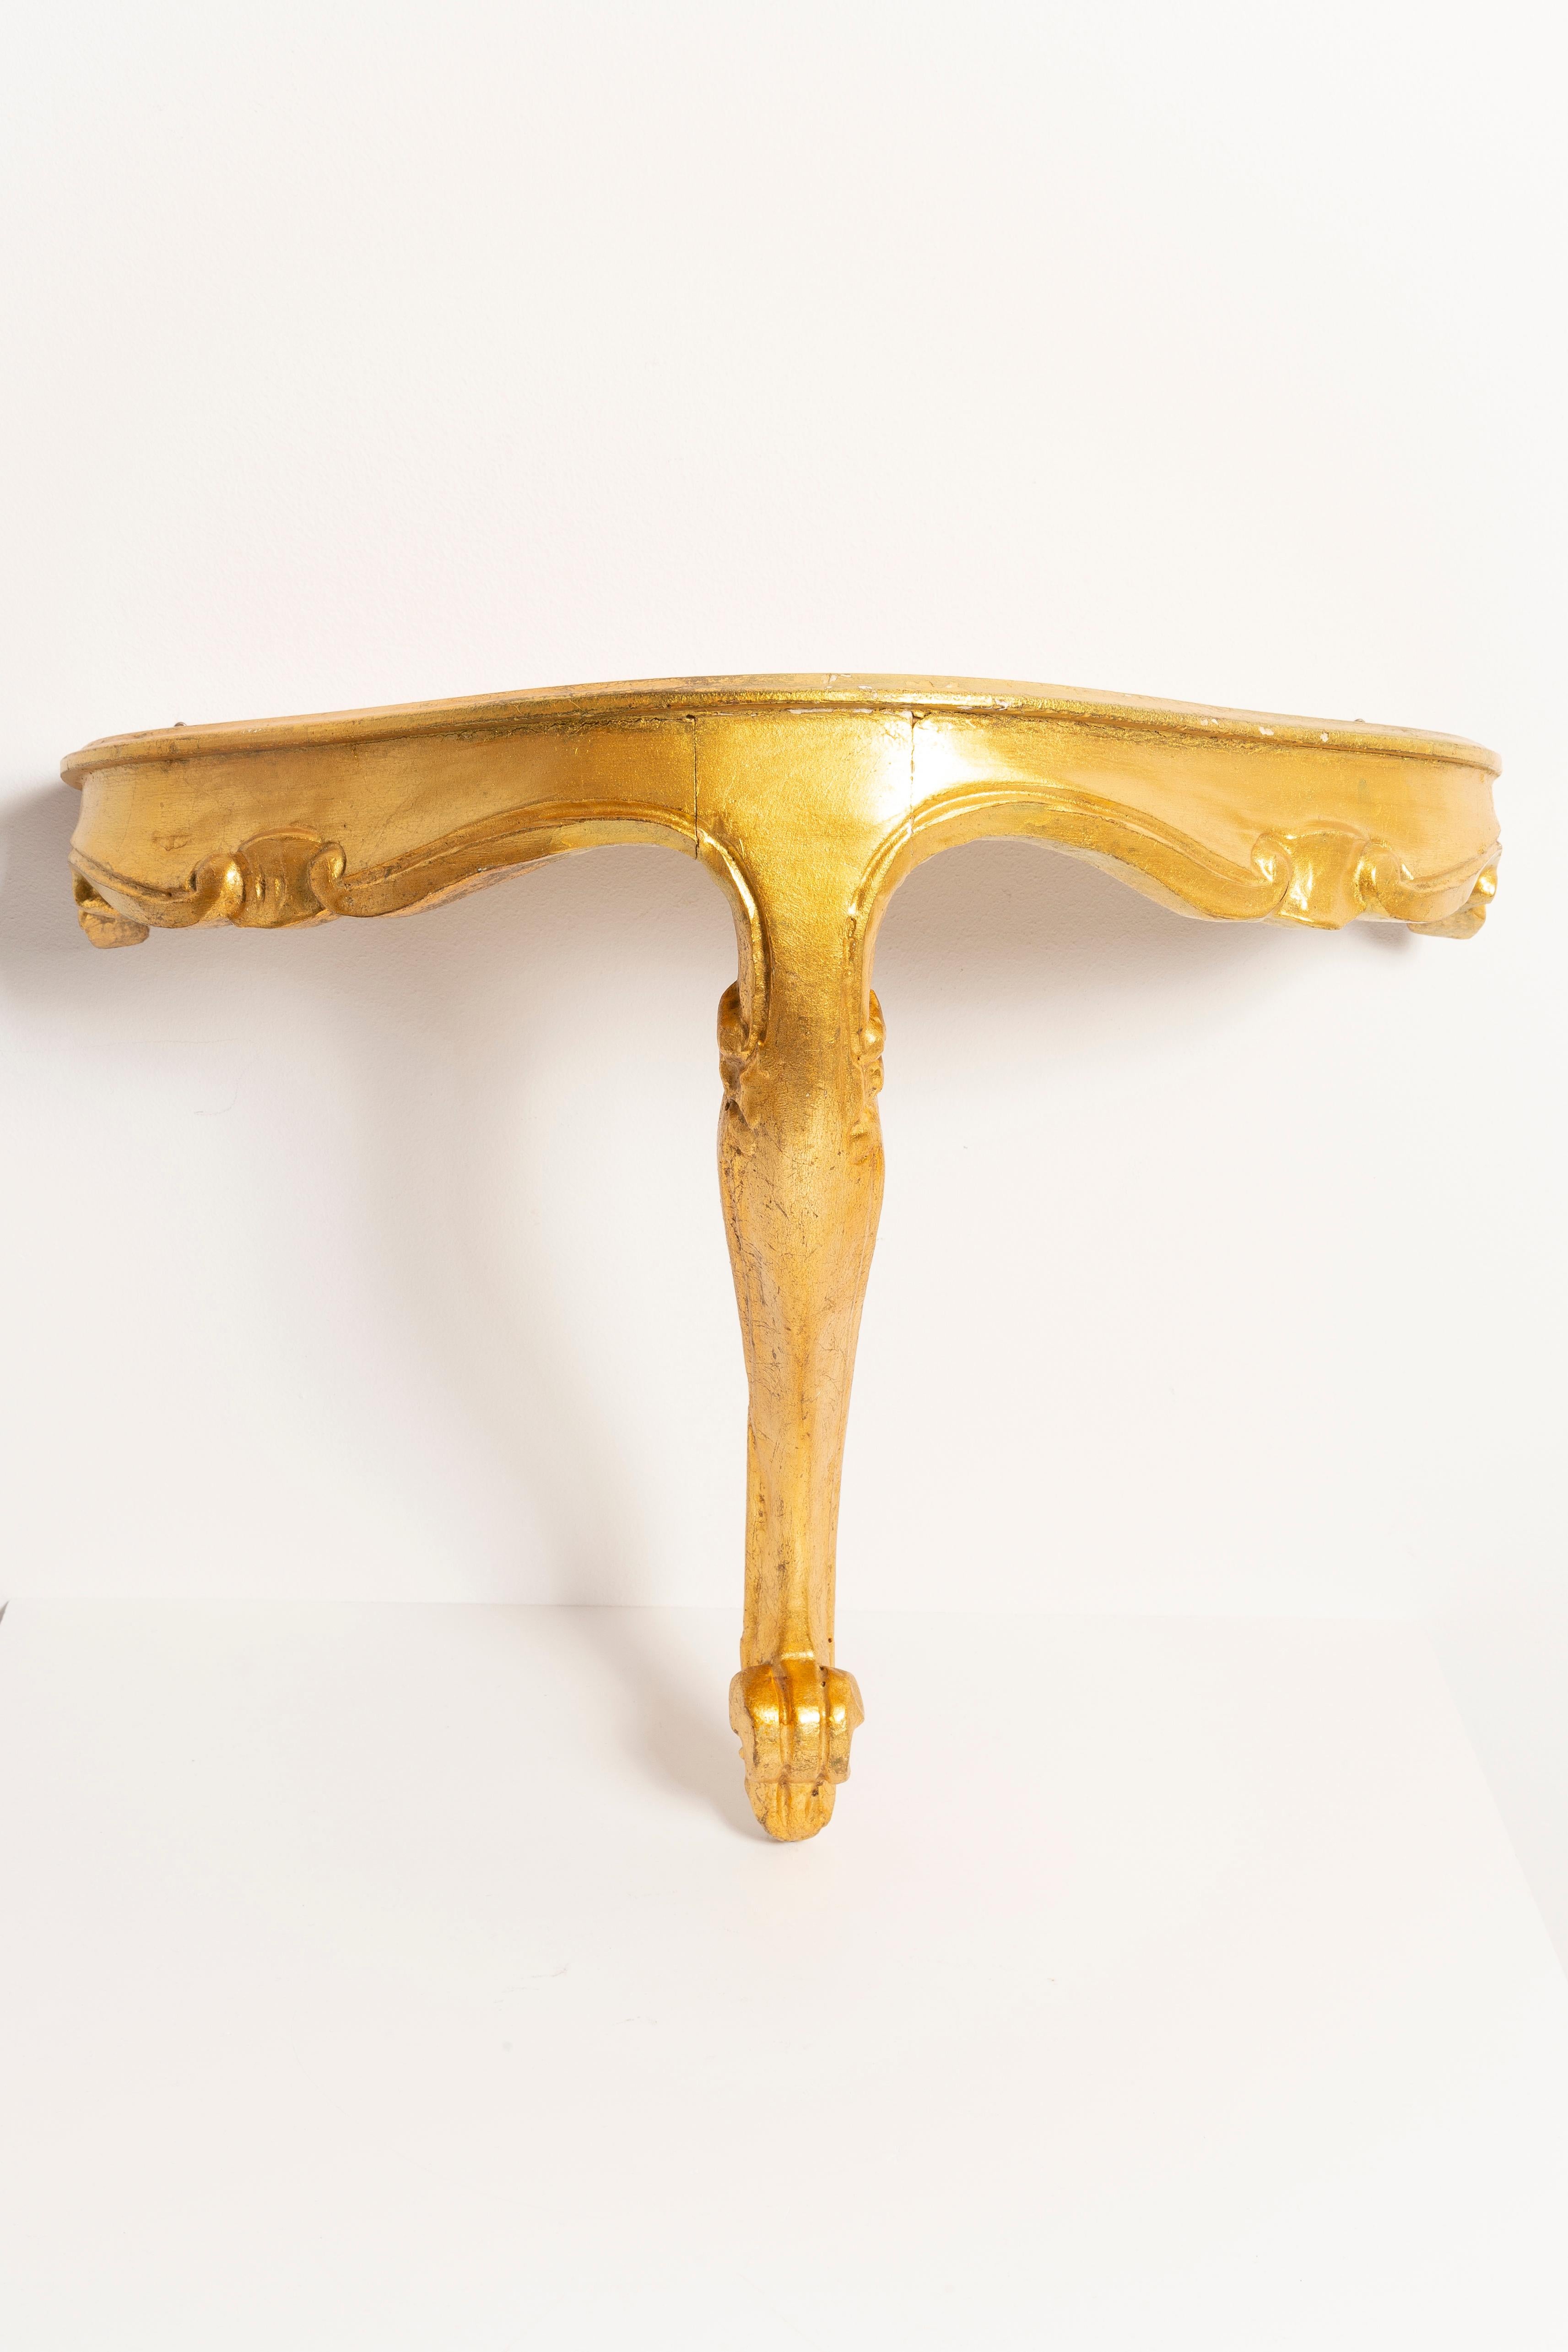 German 20th Century Wall Console Table Shelf Gold Curvy Decorative Leg, Europe, 1960s For Sale